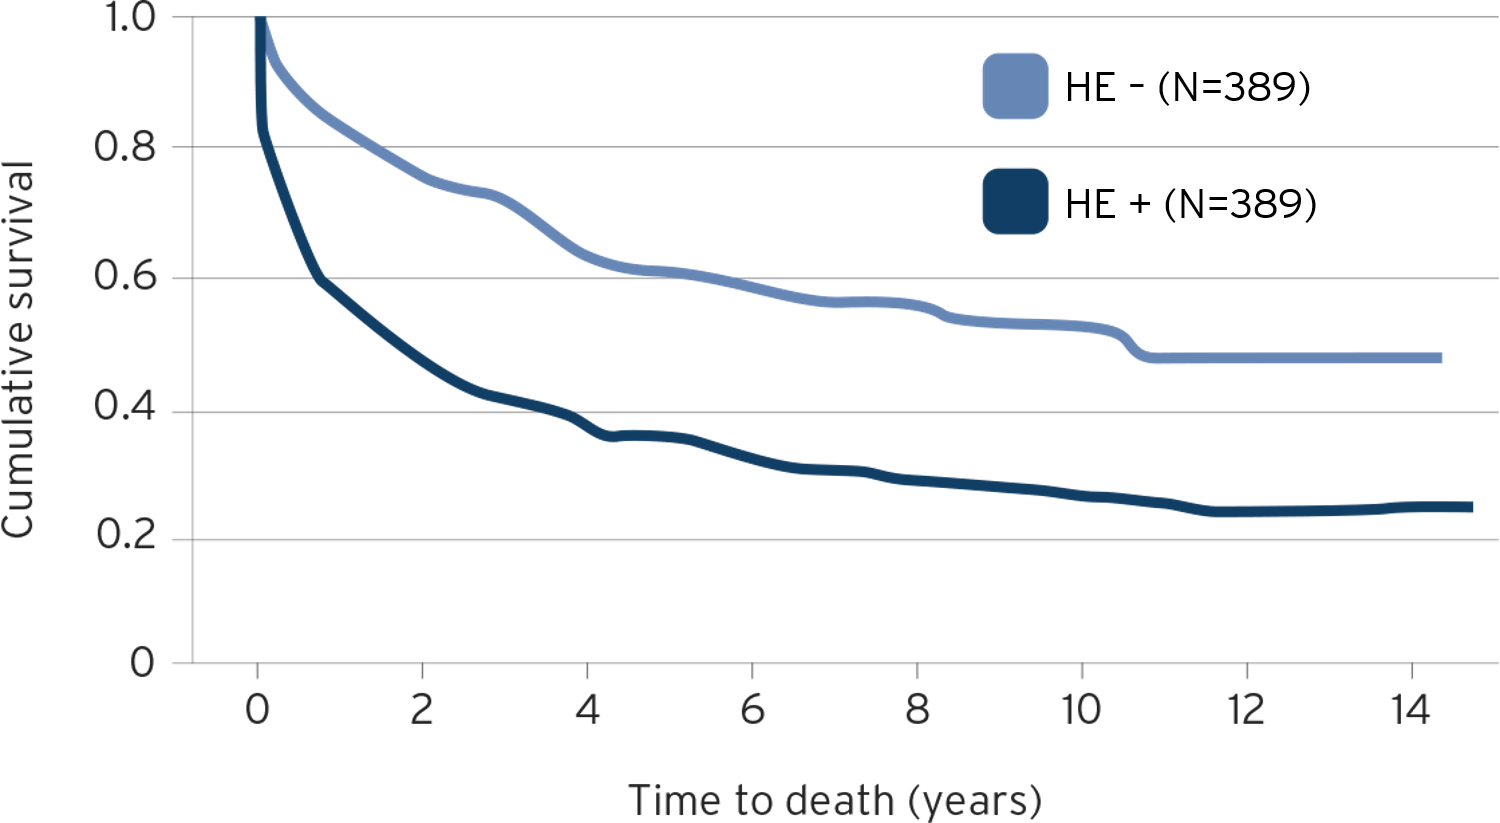 Kaplan-Meier plot for survival of patients with liver disease from diagnosis of HE relative to matched liver disease control